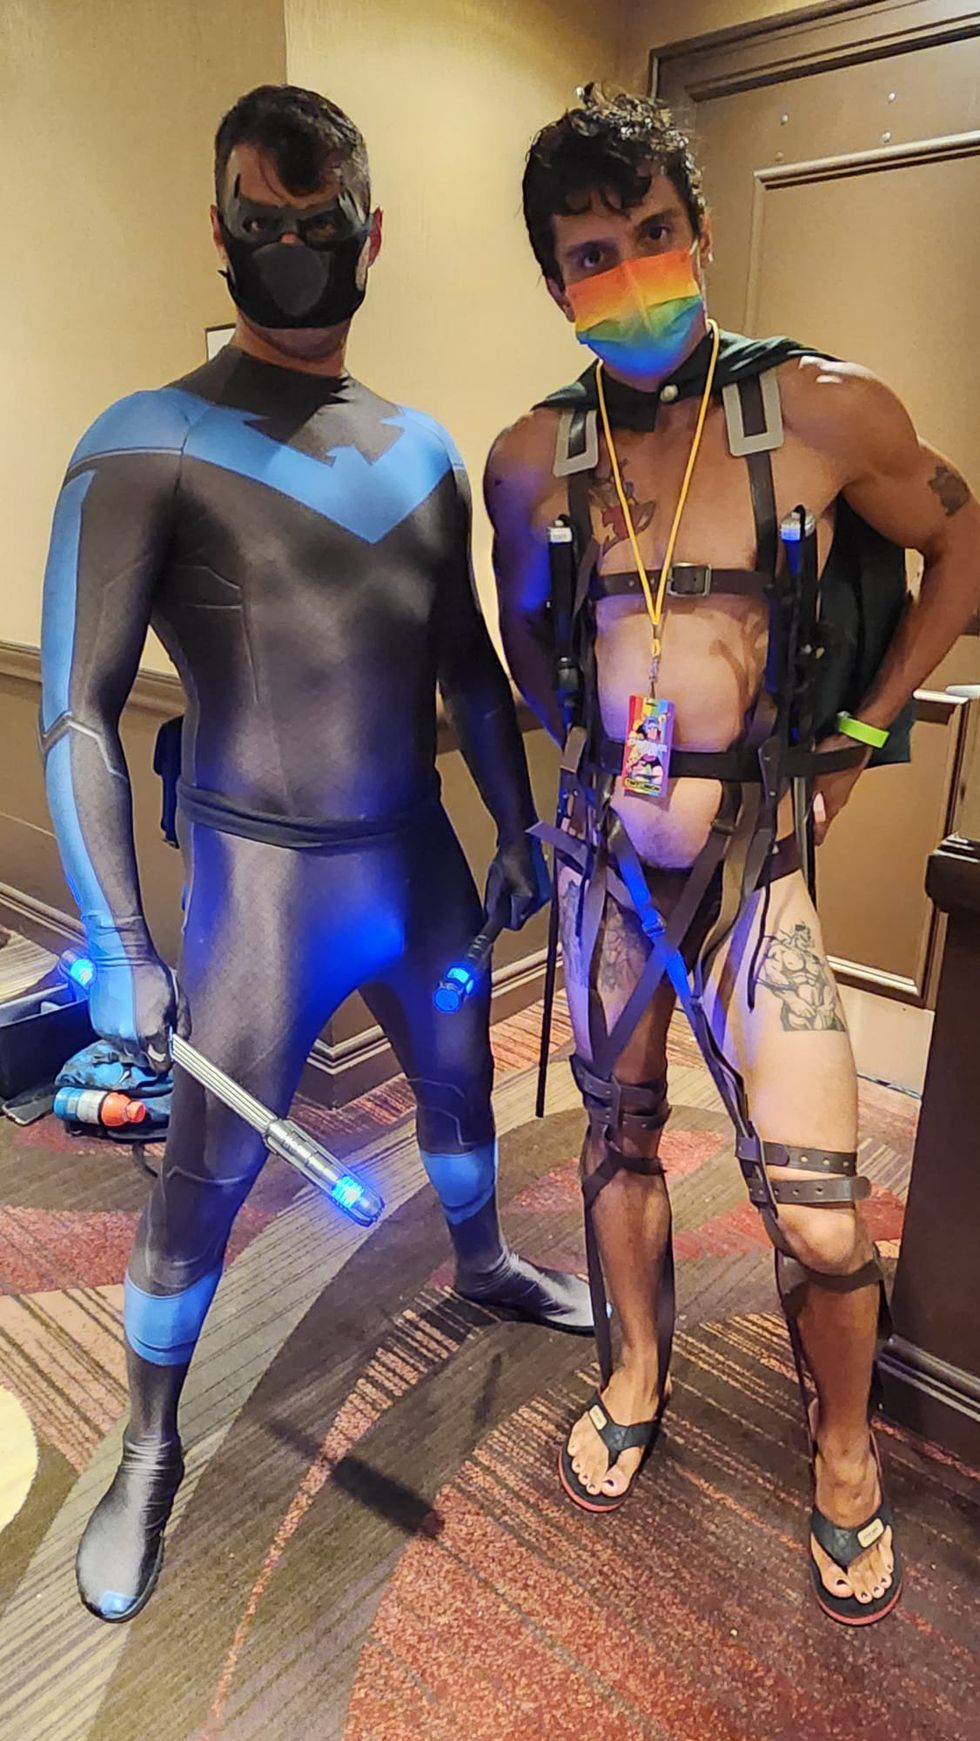 Photo Gallery Flamecon 2023